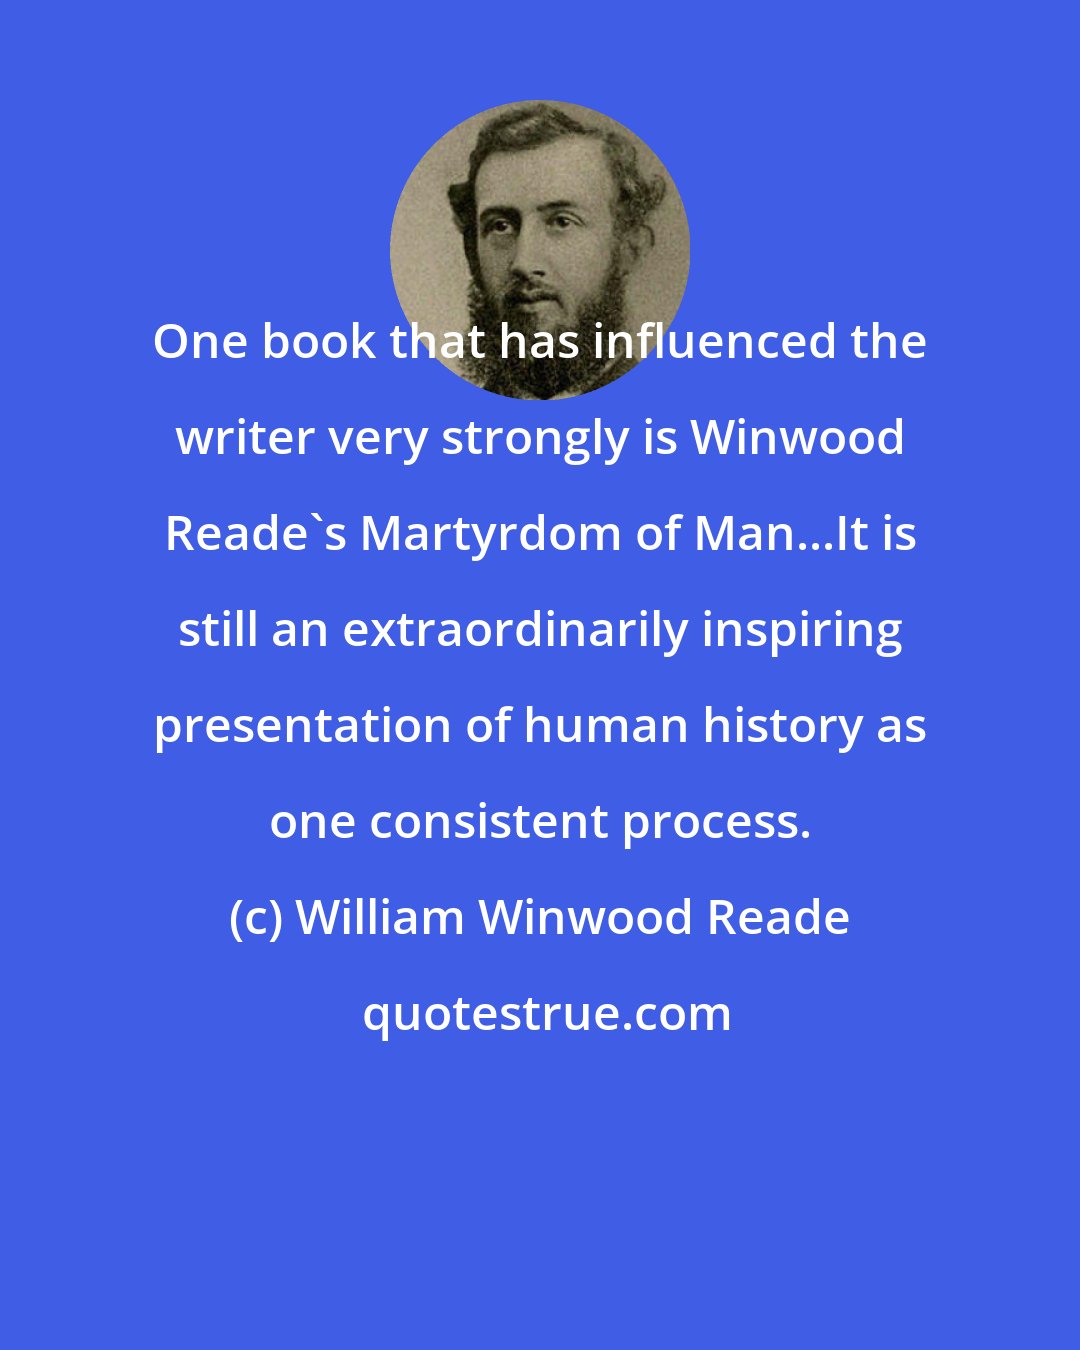 William Winwood Reade: One book that has influenced the writer very strongly is Winwood Reade's Martyrdom of Man...It is still an extraordinarily inspiring presentation of human history as one consistent process.